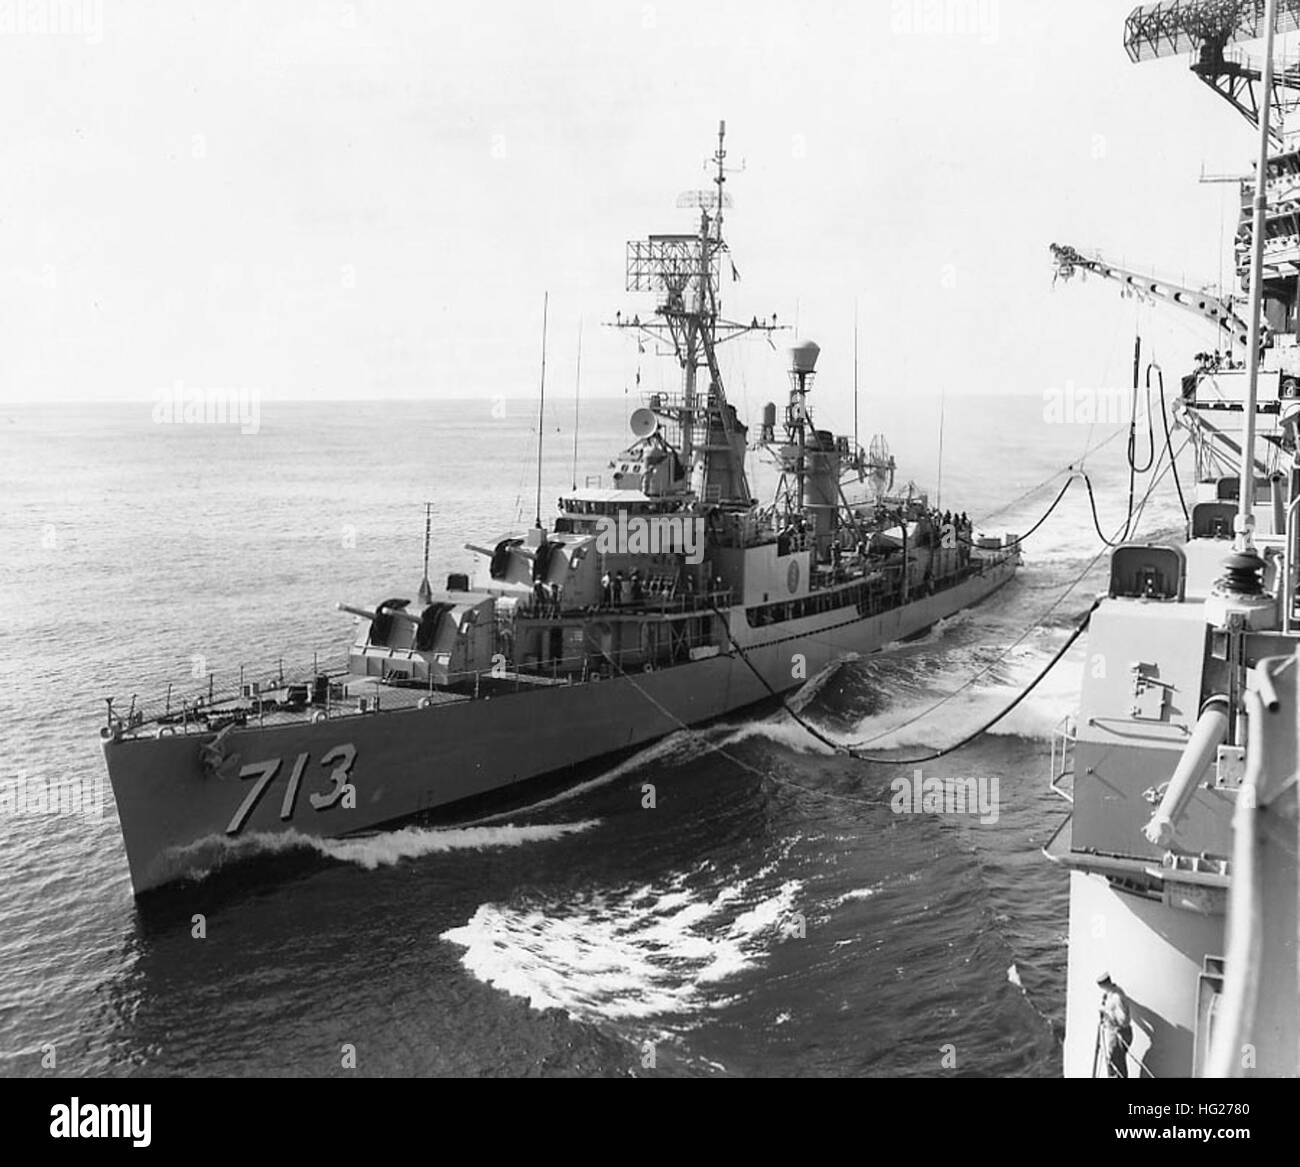 USS Kenneth D. Bailey (DDR-713) refueling from USS Franklin D. Roosevelt (CVA-42) while operating off the coast of the Dominican Republic on 20 October 1961. Note the 5/54 Mark 39 gun mount partially visible in the lower right.  Official U.S. Navy Photograph, from the collections of the Naval History and Heritage Command. USS Kenneth D. Bailey (DDR-713) refueling from USS FD Roosevelt (CVA-42) in 1961 Stock Photo